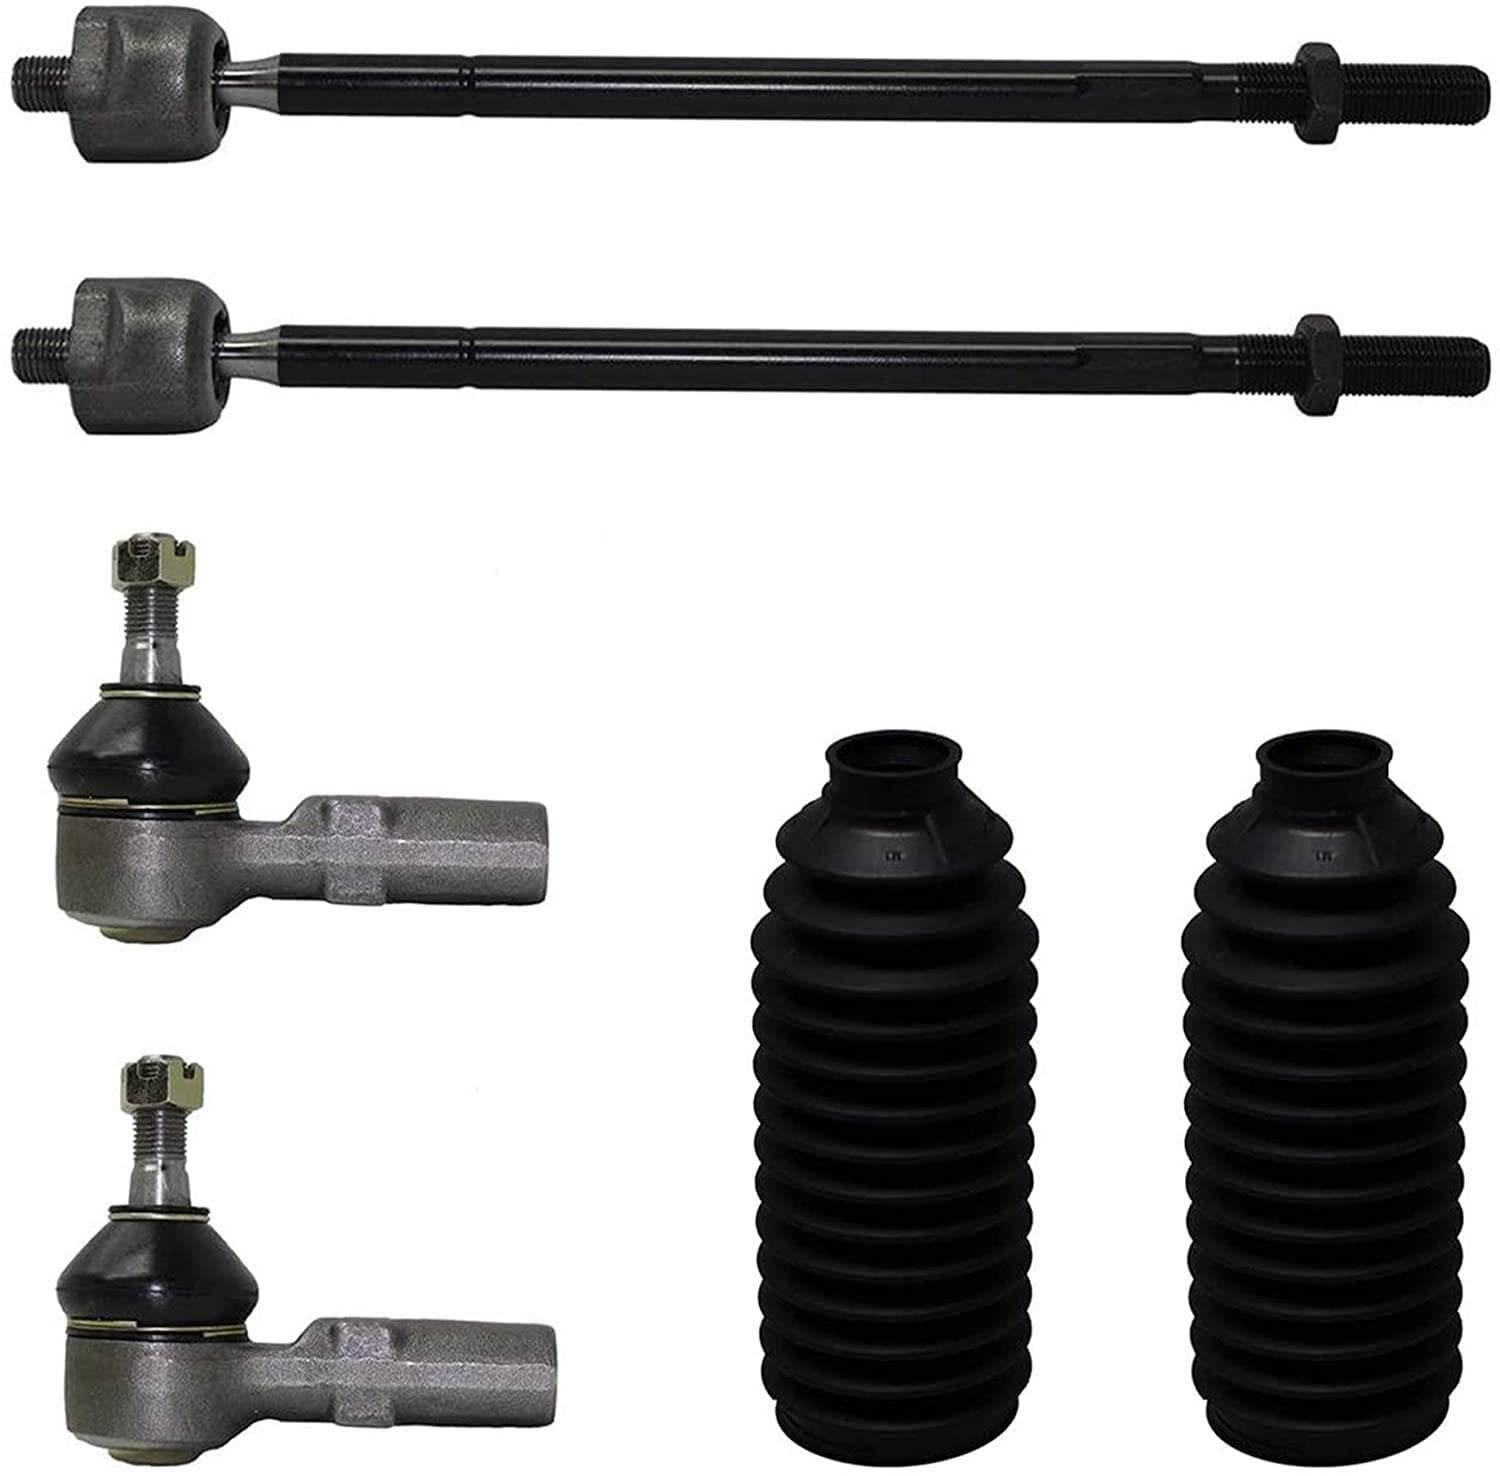 PartsW 6 Pcs Steering Kit For Lexus ES300 Toyoya Avalon Camry Camry Sienna & Solara All Inner & Outer Tie Rod Ends plus Rack & Pinion Boots Bellow 